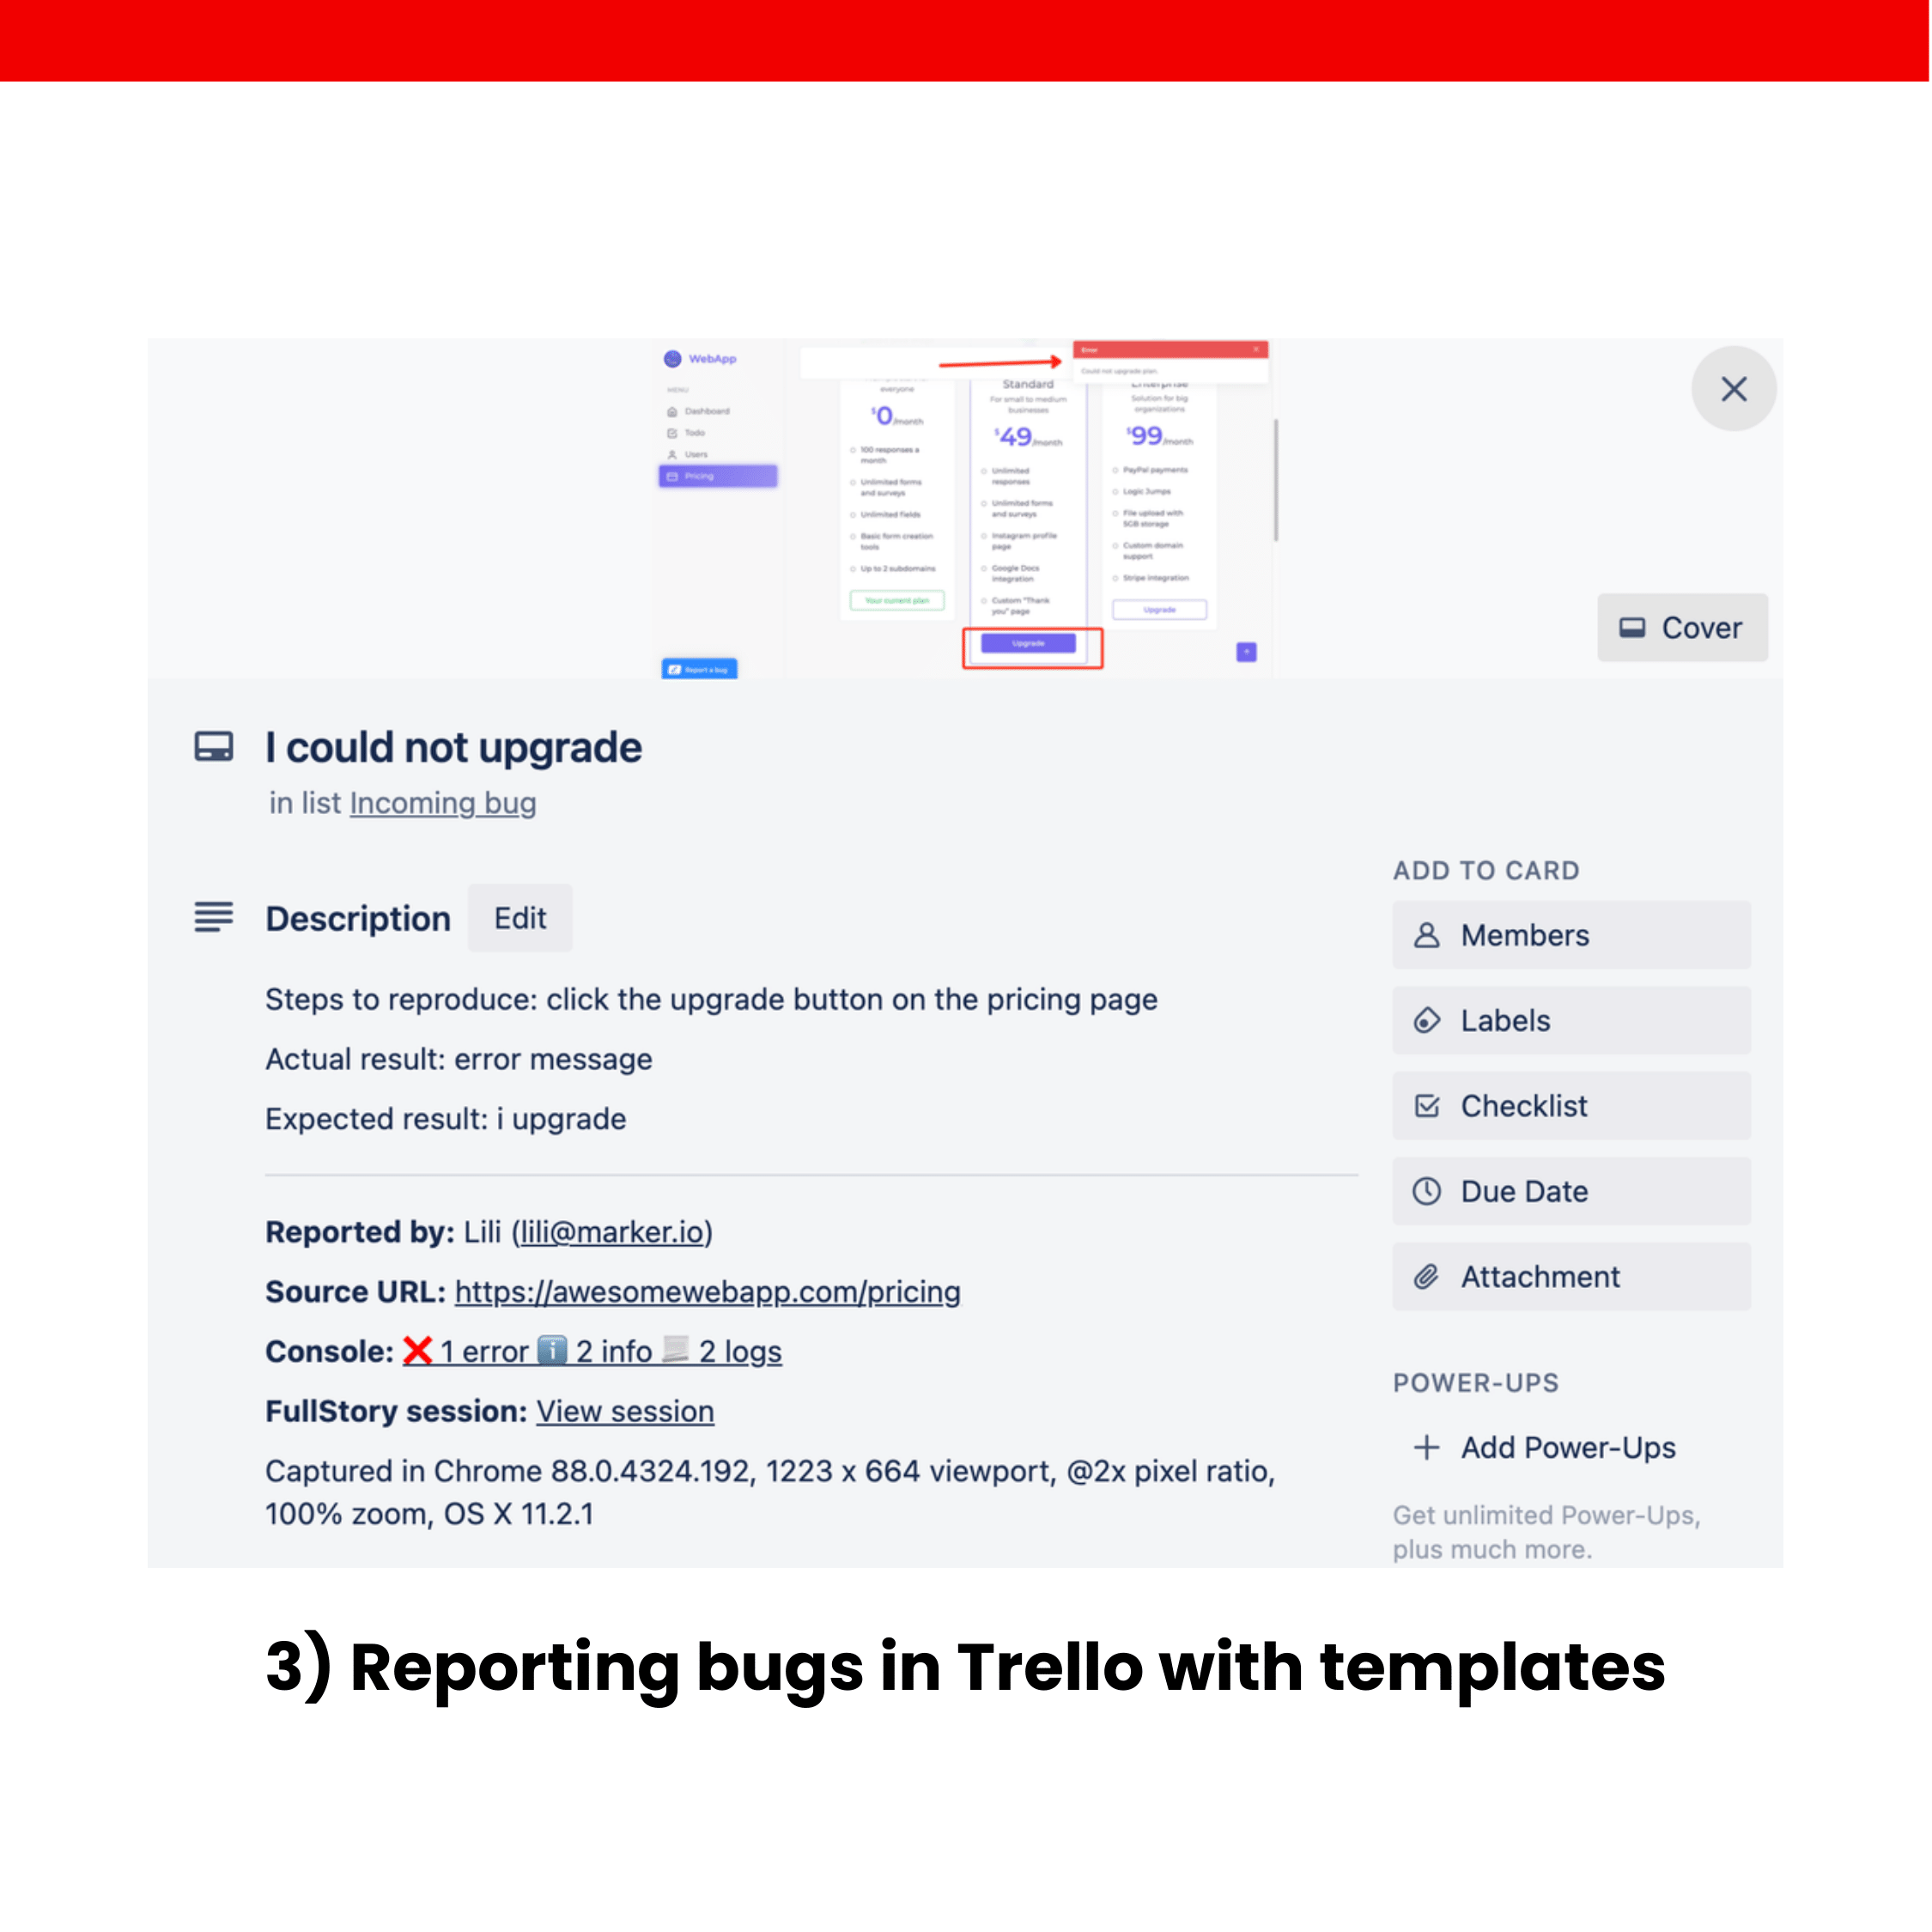 3) Reporting bugs in Trello with templates